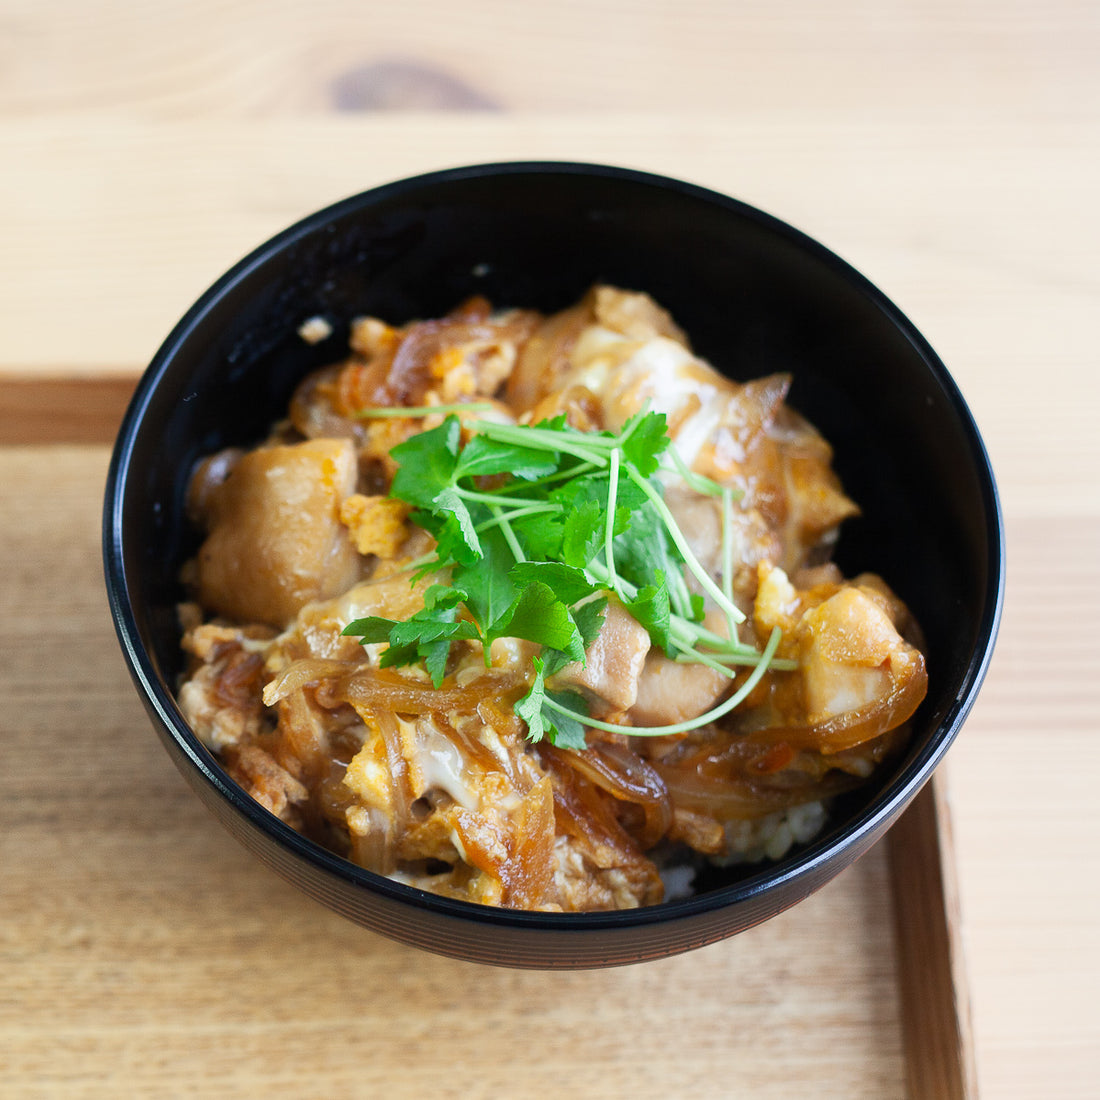 How to Make Japanese Oyakodon (Chicken and Egg Rice Bowl)